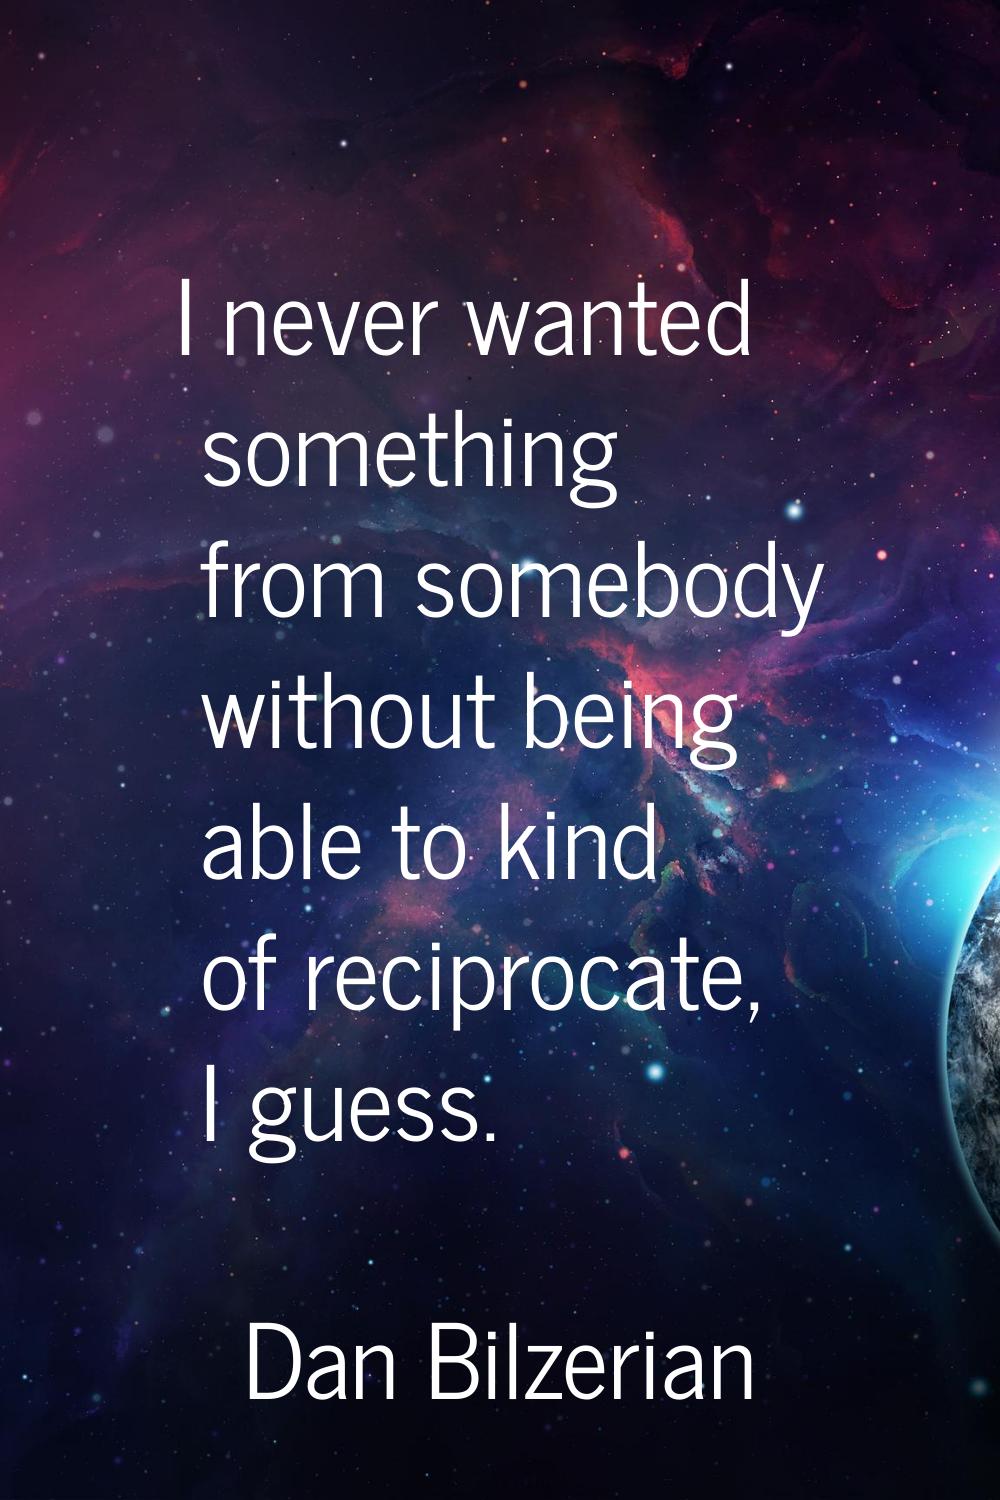 I never wanted something from somebody without being able to kind of reciprocate, I guess.